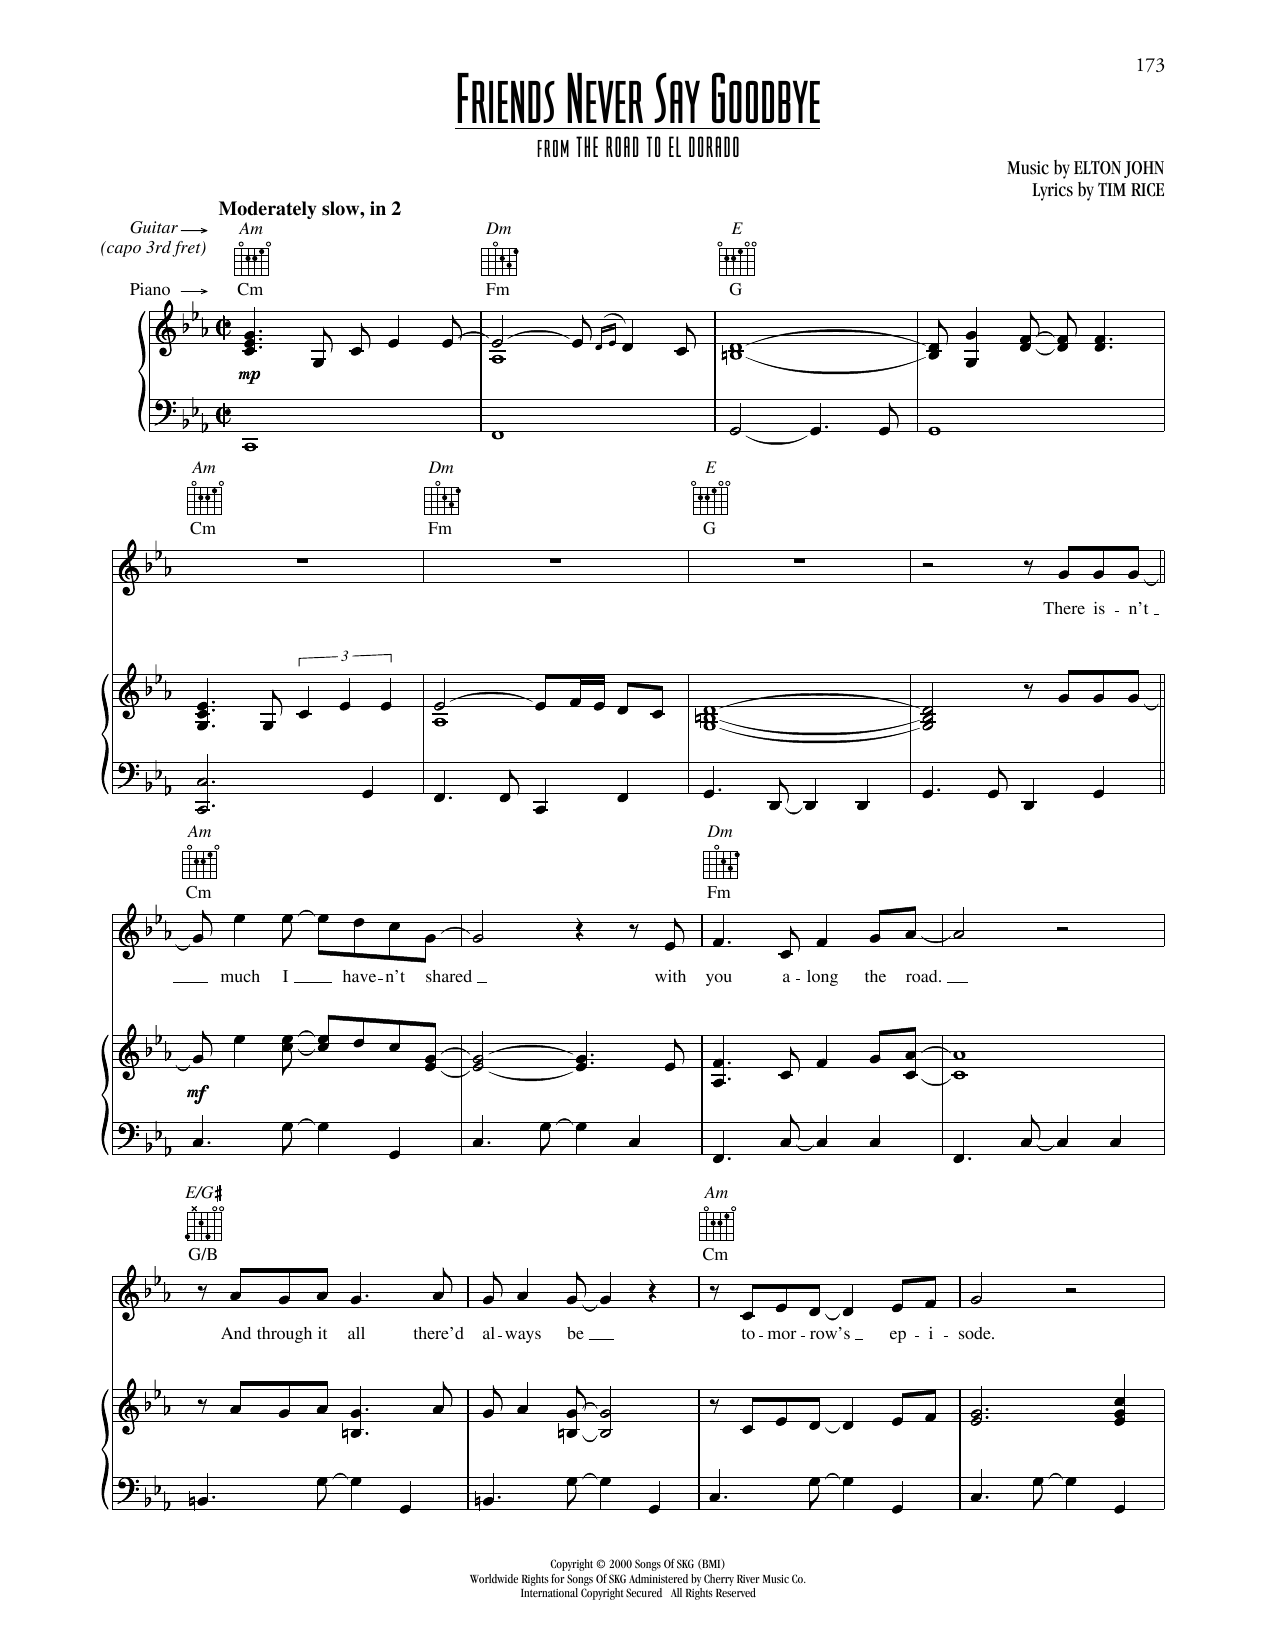 Download Elton John Friends Never Say Goodbye (from The Roa Sheet Music